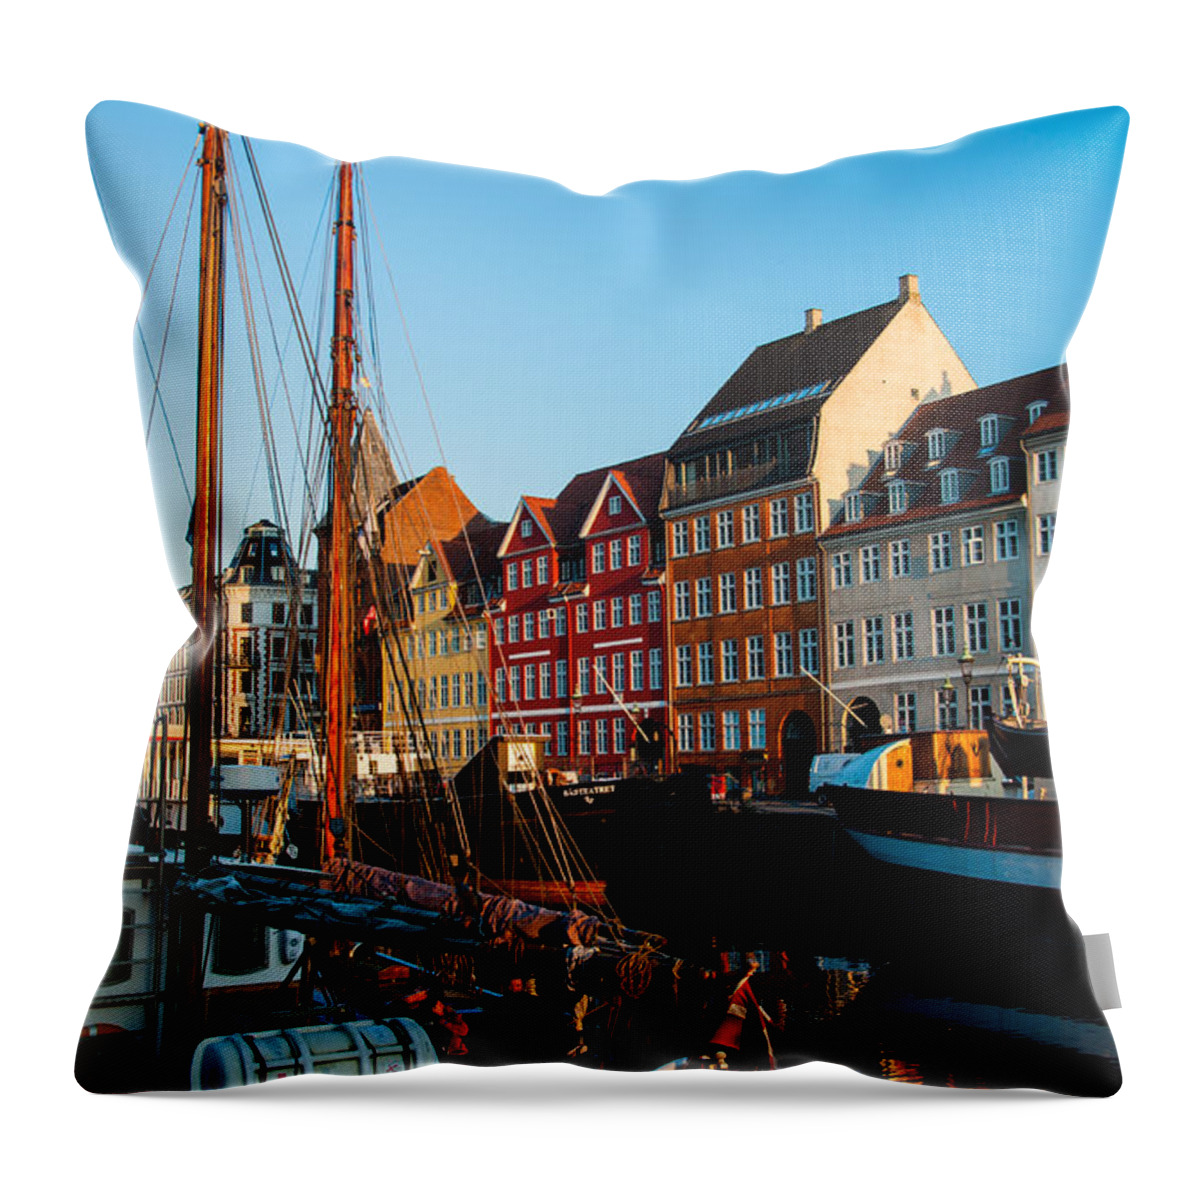 Boats Throw Pillow featuring the photograph Nyhavn Harbour by Gareth Leddy